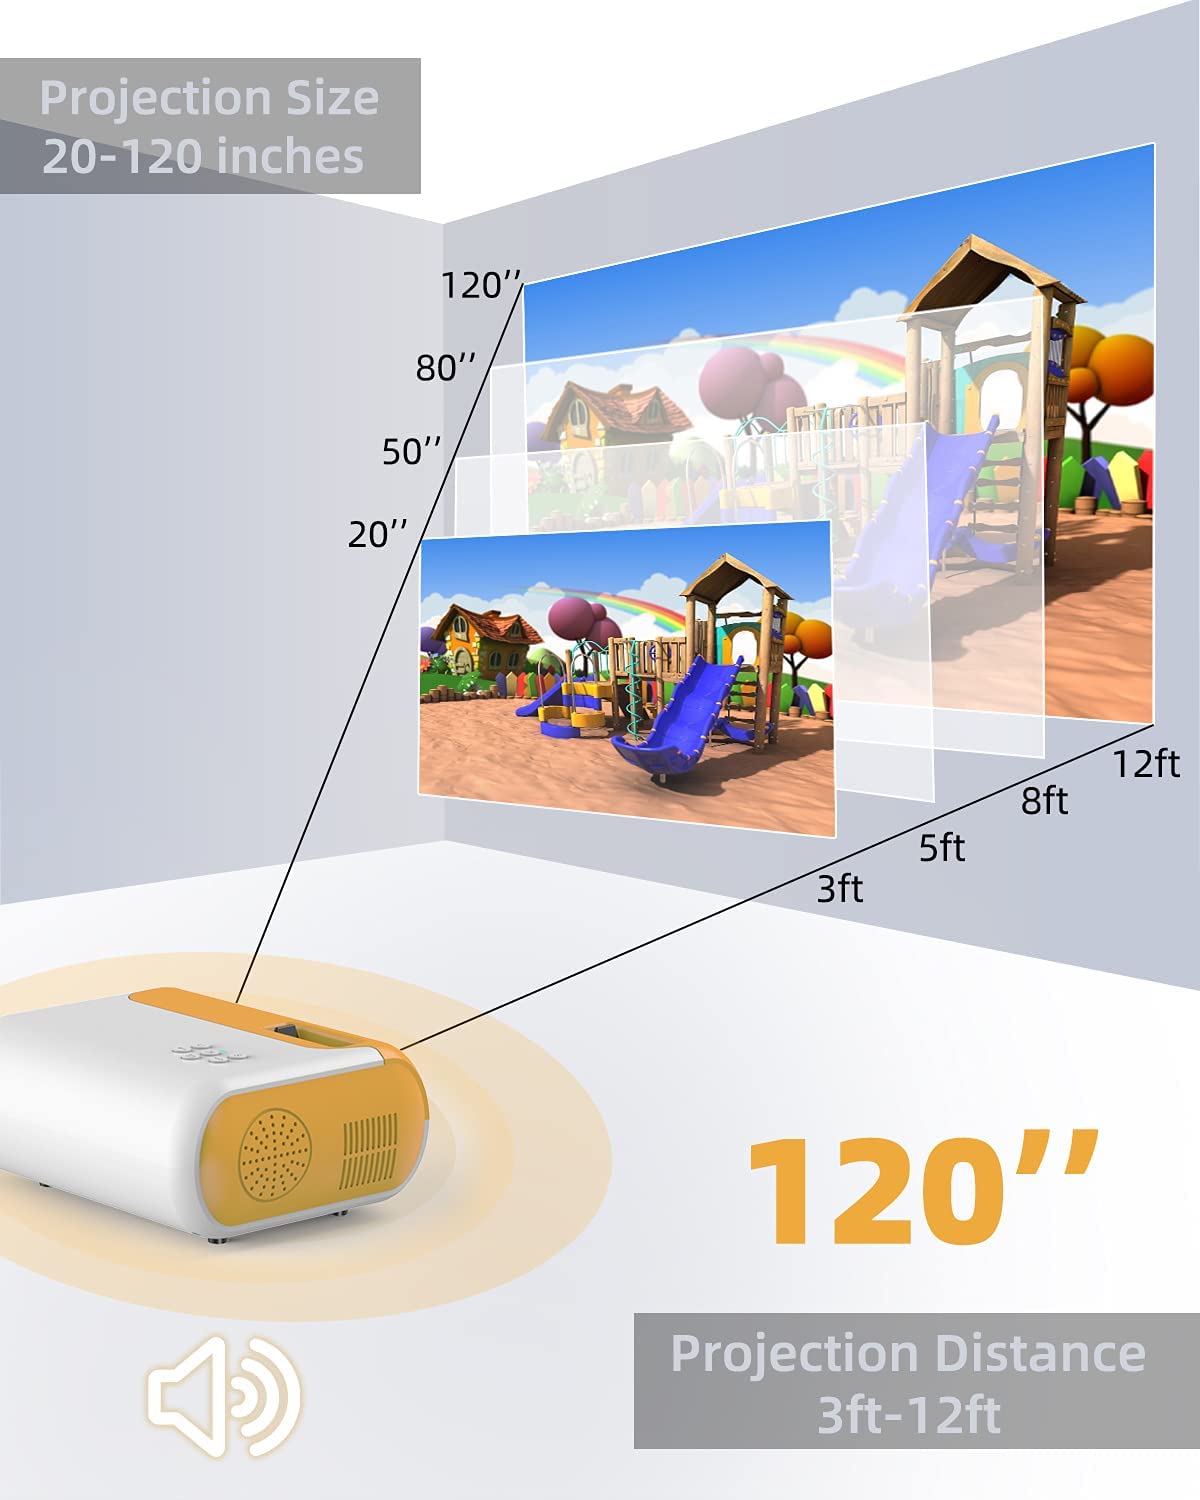 1080P Supported Video Projectors for Outdoor Movies, Kids Cartoon, Home Theater, Compatible with iPhone, Laptop, TV Box, HDMI